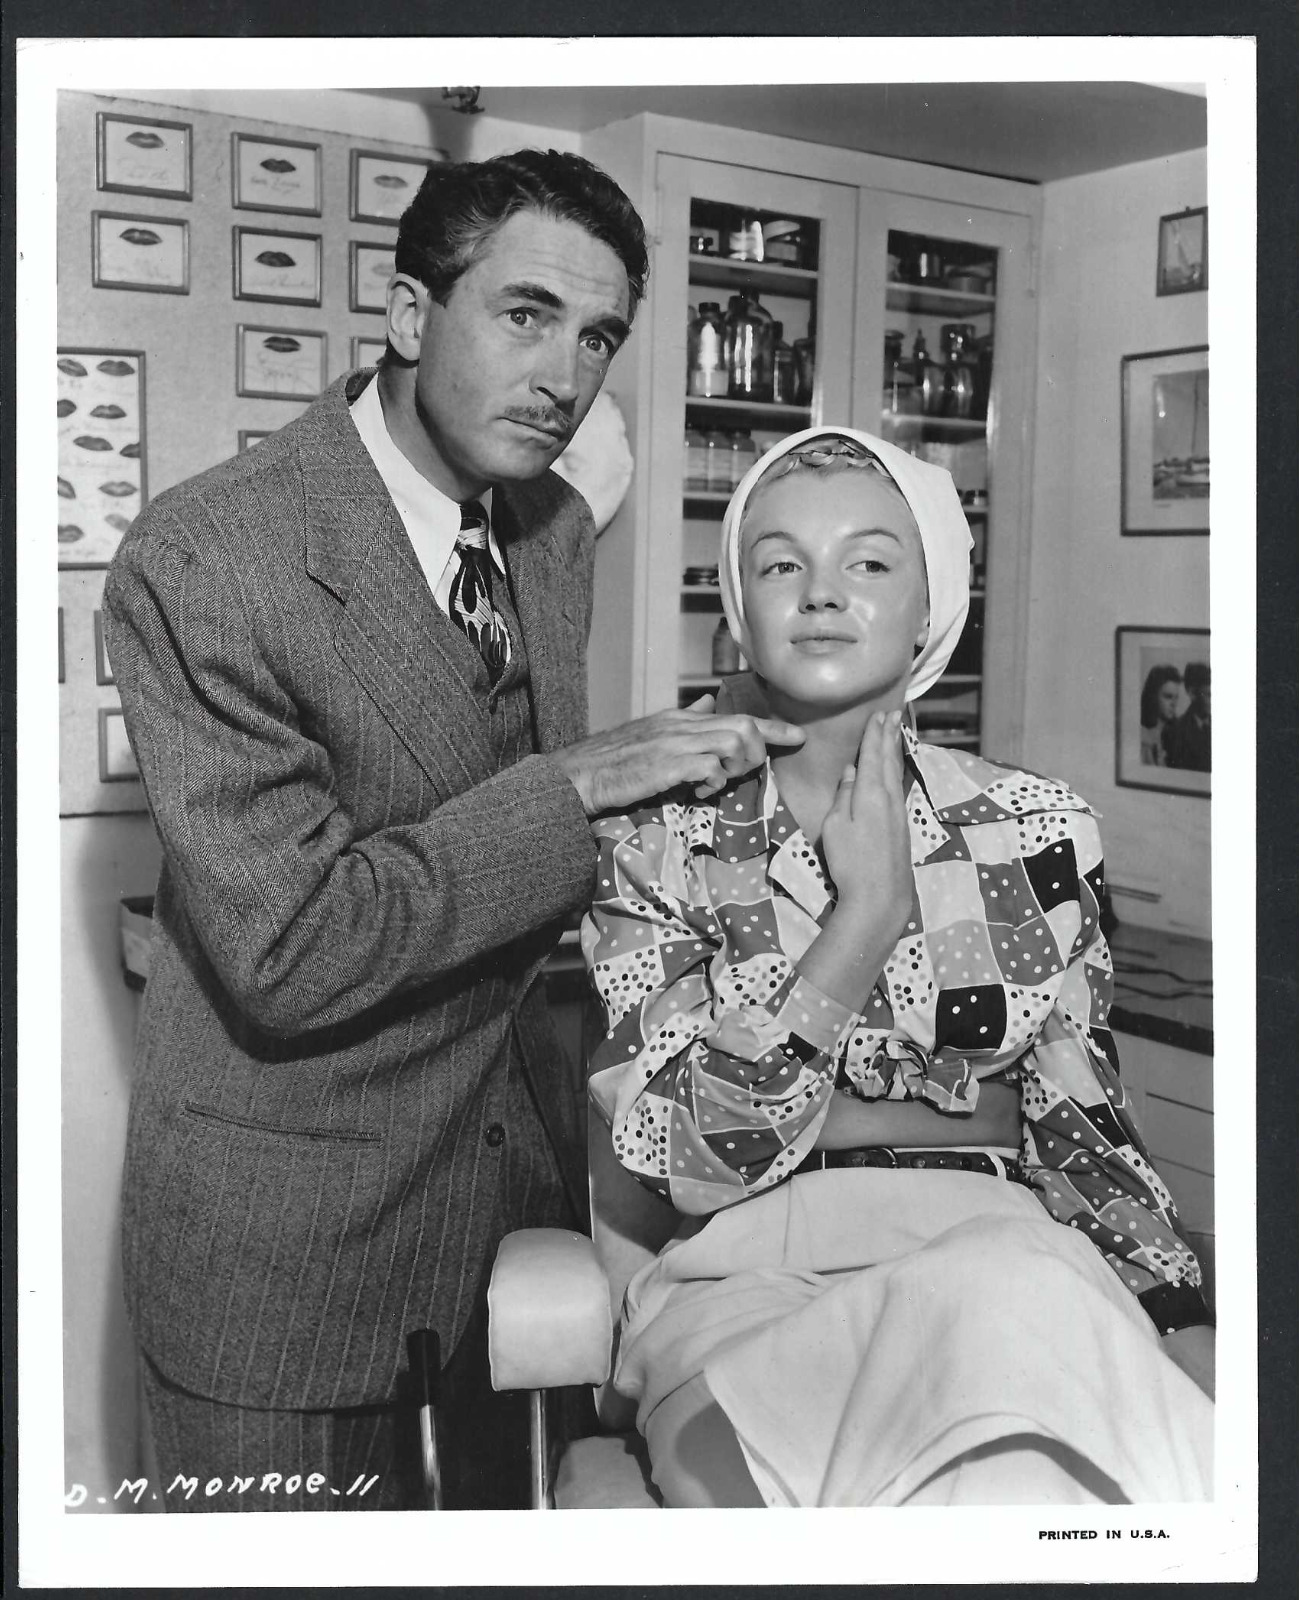 HOLLYWOOD Marilyn Monroe in the Make Up Chair VINTAGE ORIGINAL PHOTO